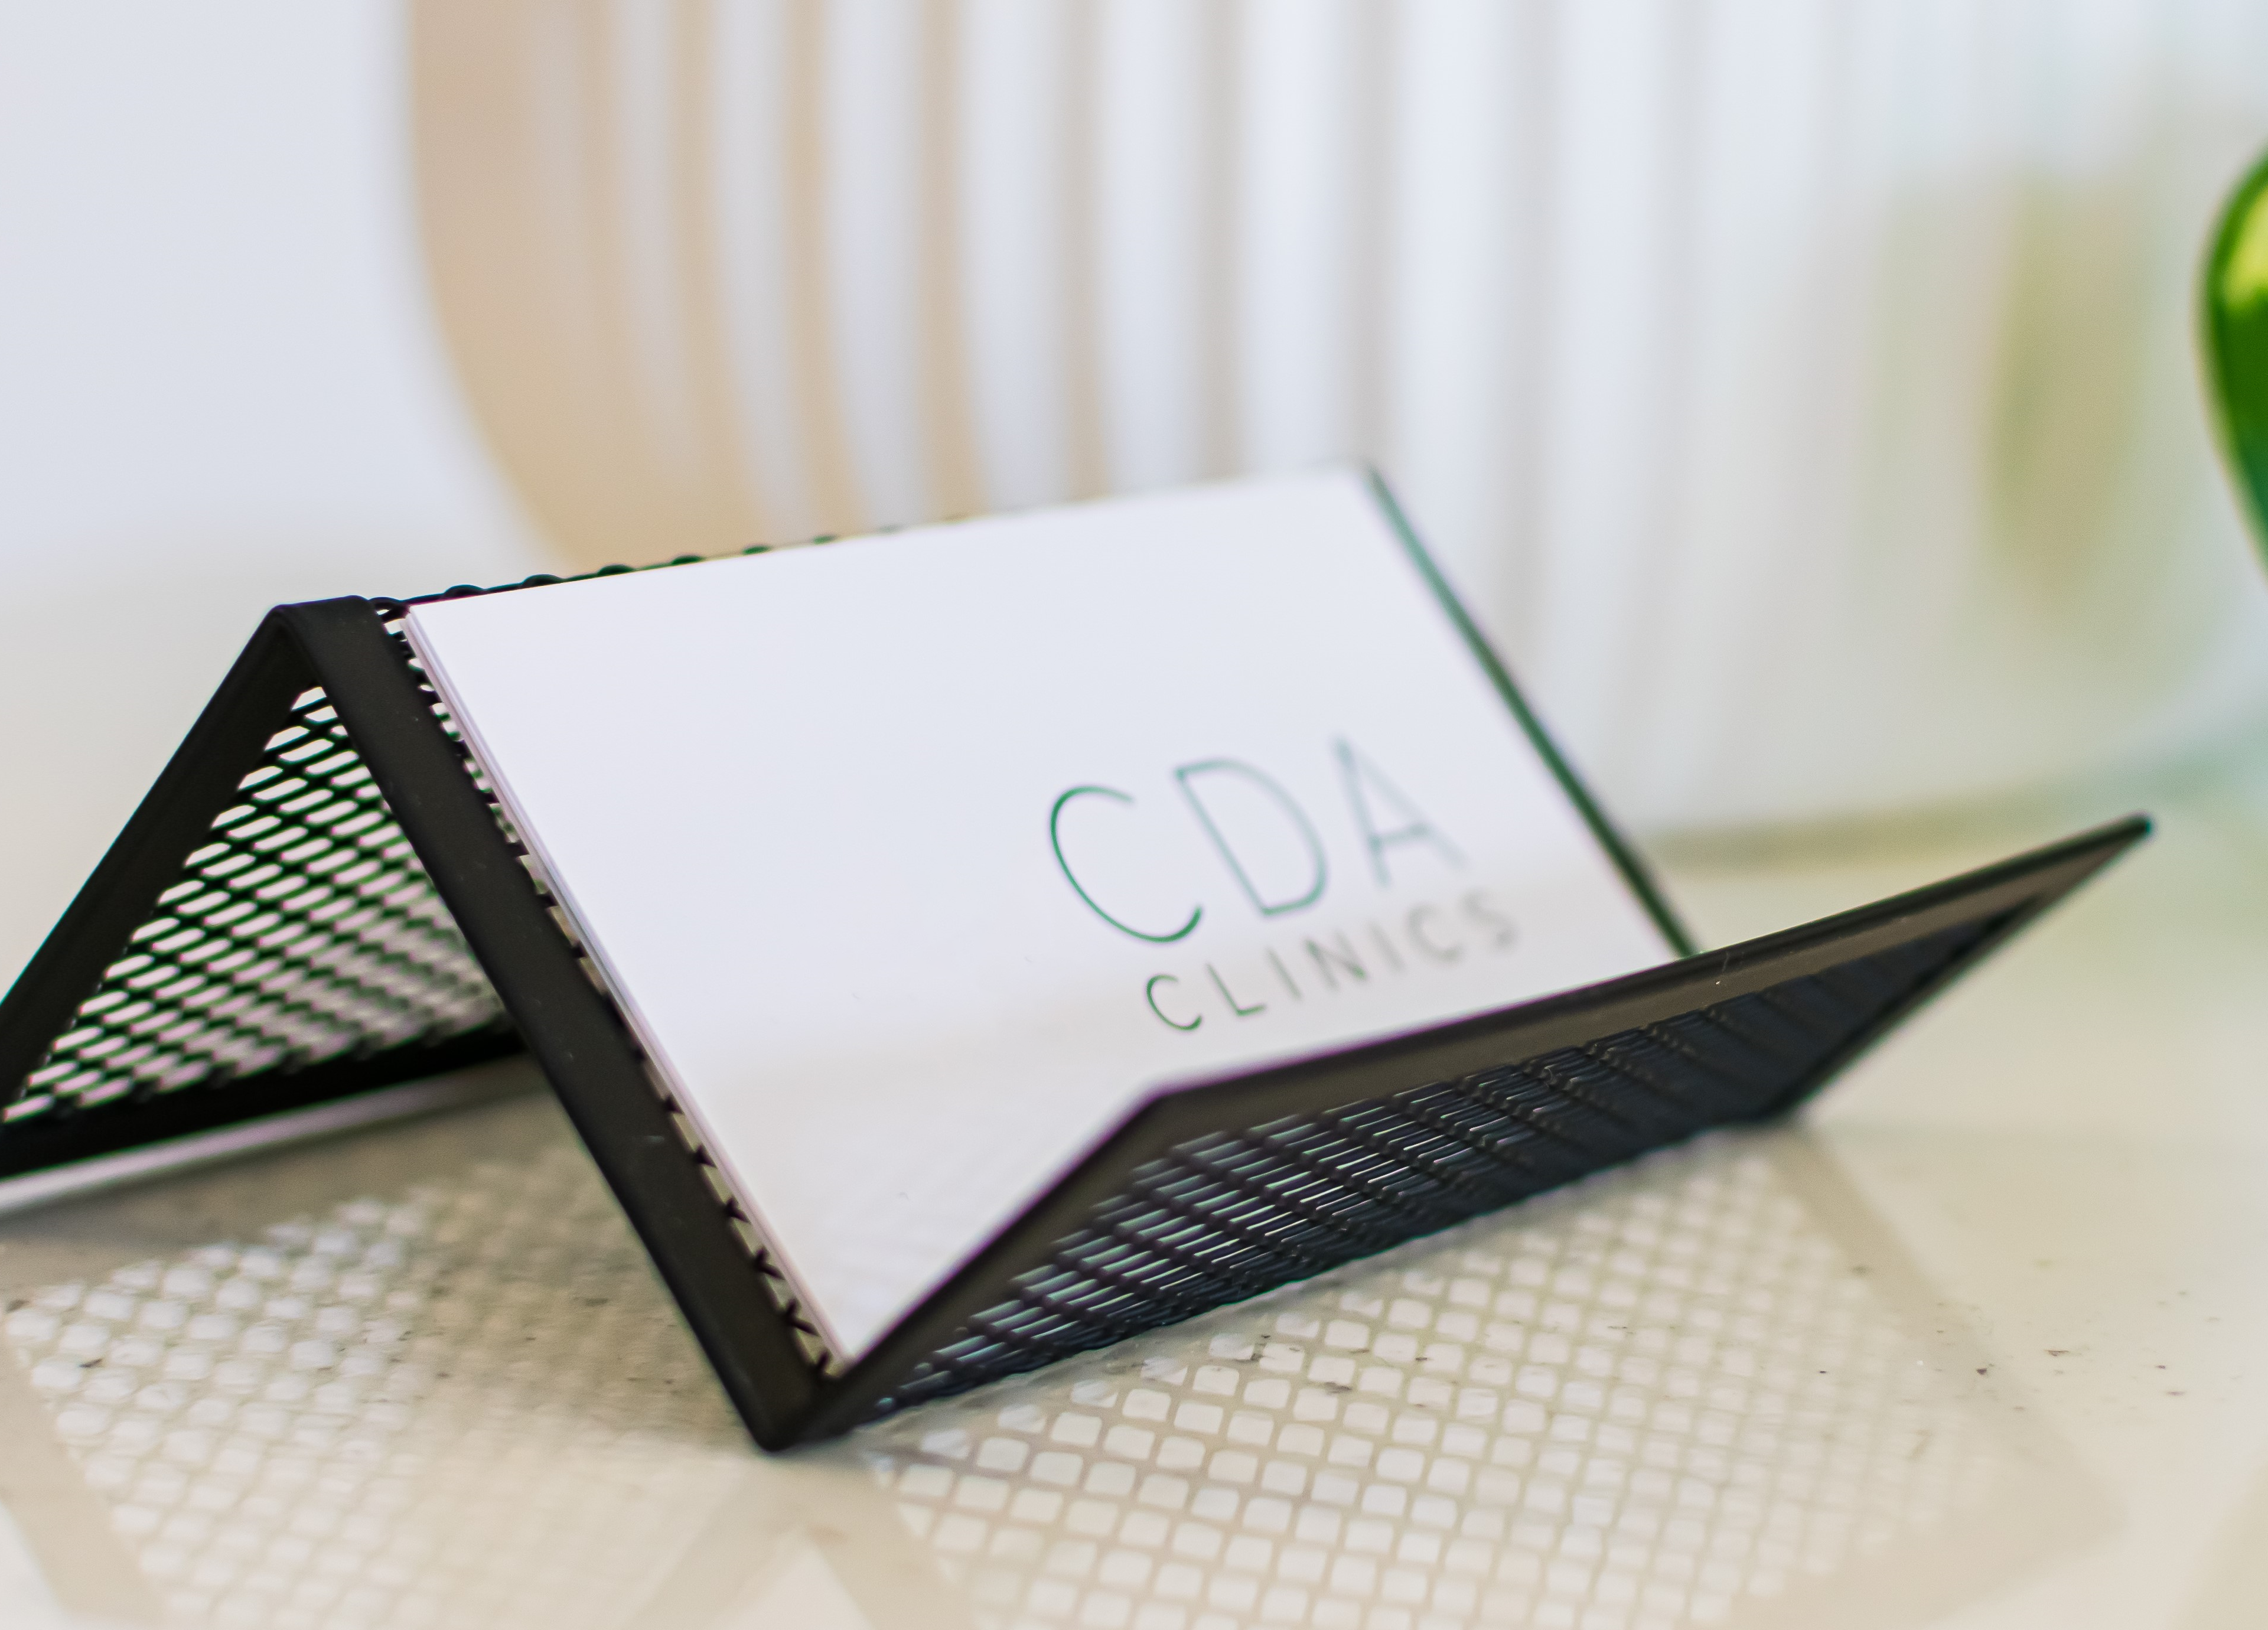 Cannabis Doctors Australia business card in a cardholder on a desk